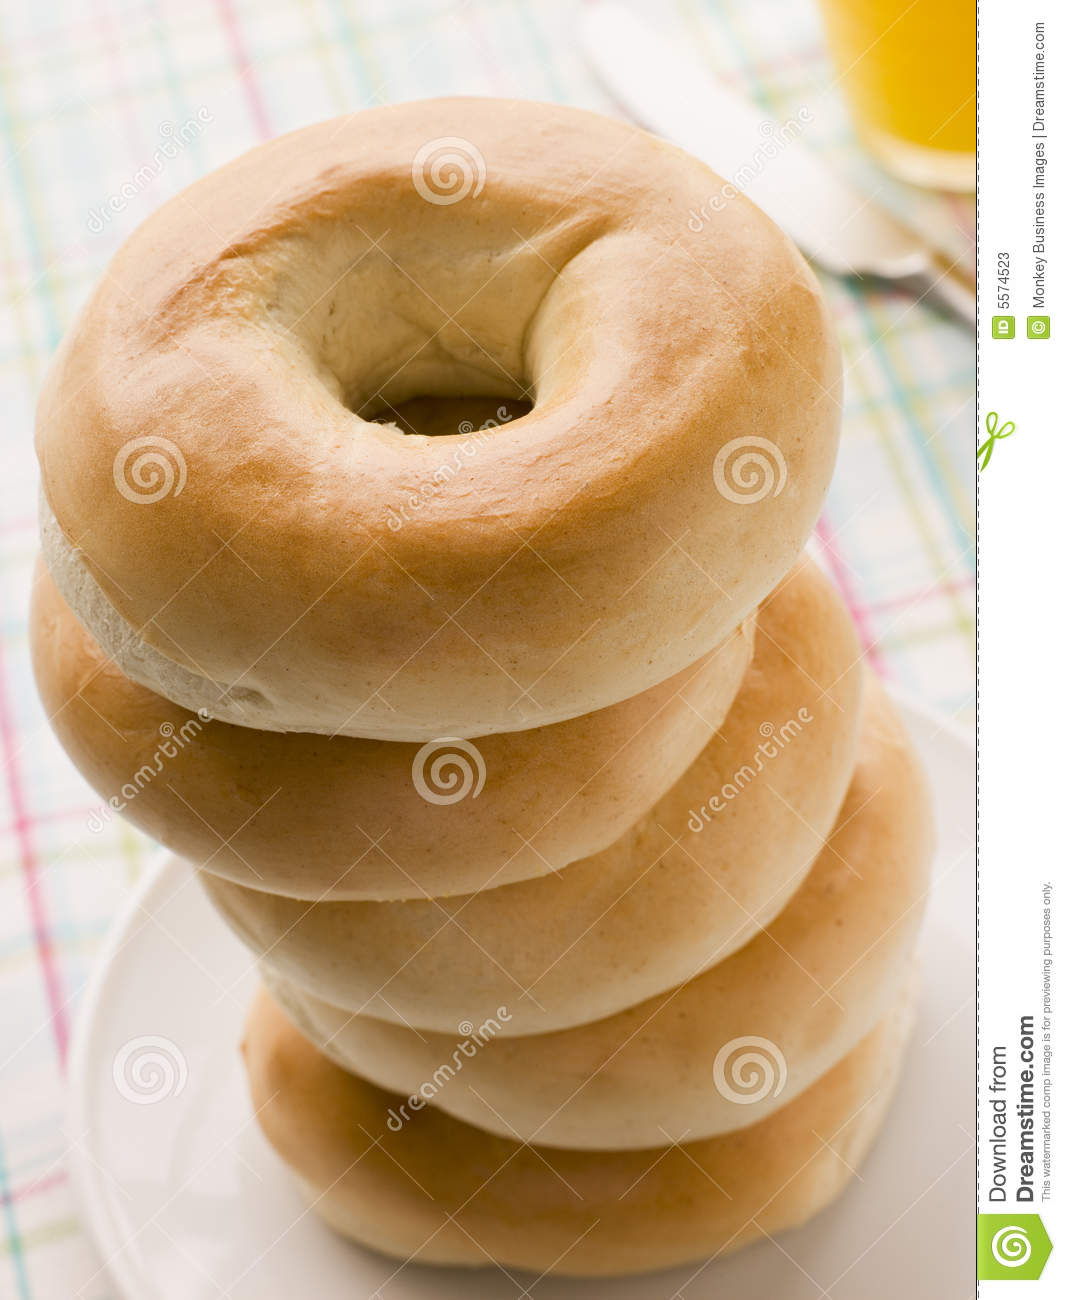 Stock Images Of   Stack Of Plain Bagels With A Glass Of Orange Juice